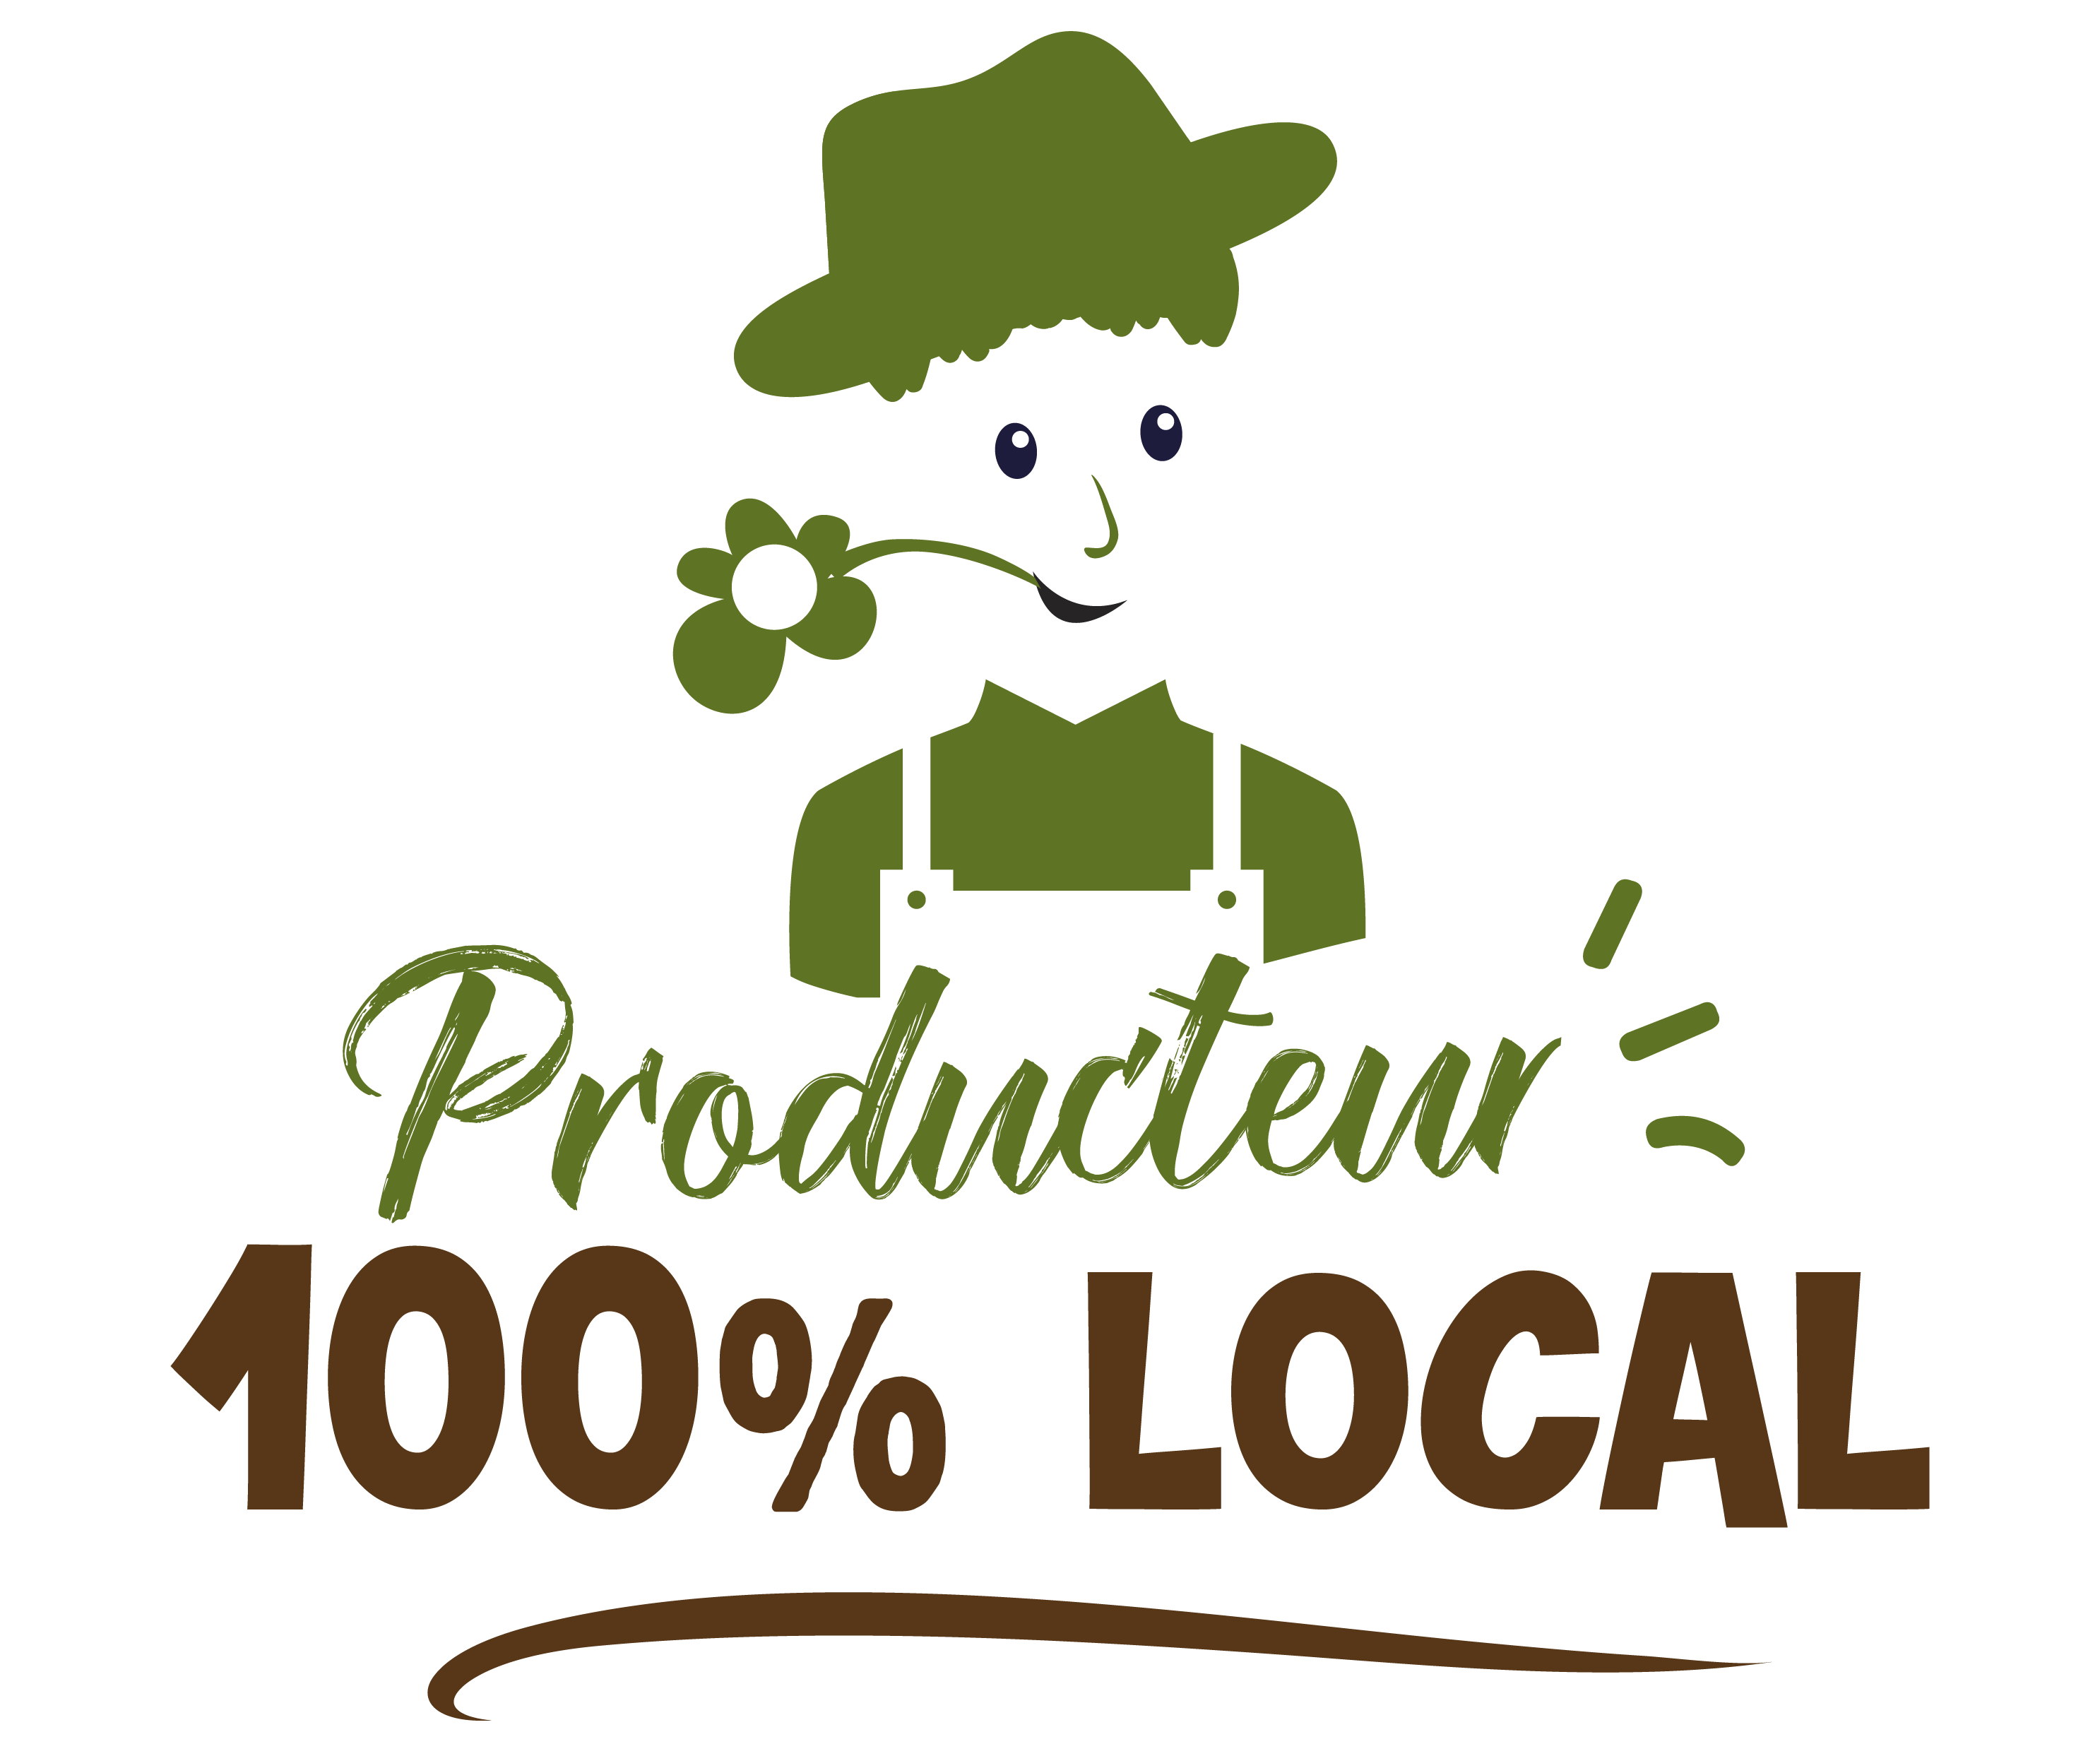 Small local producer